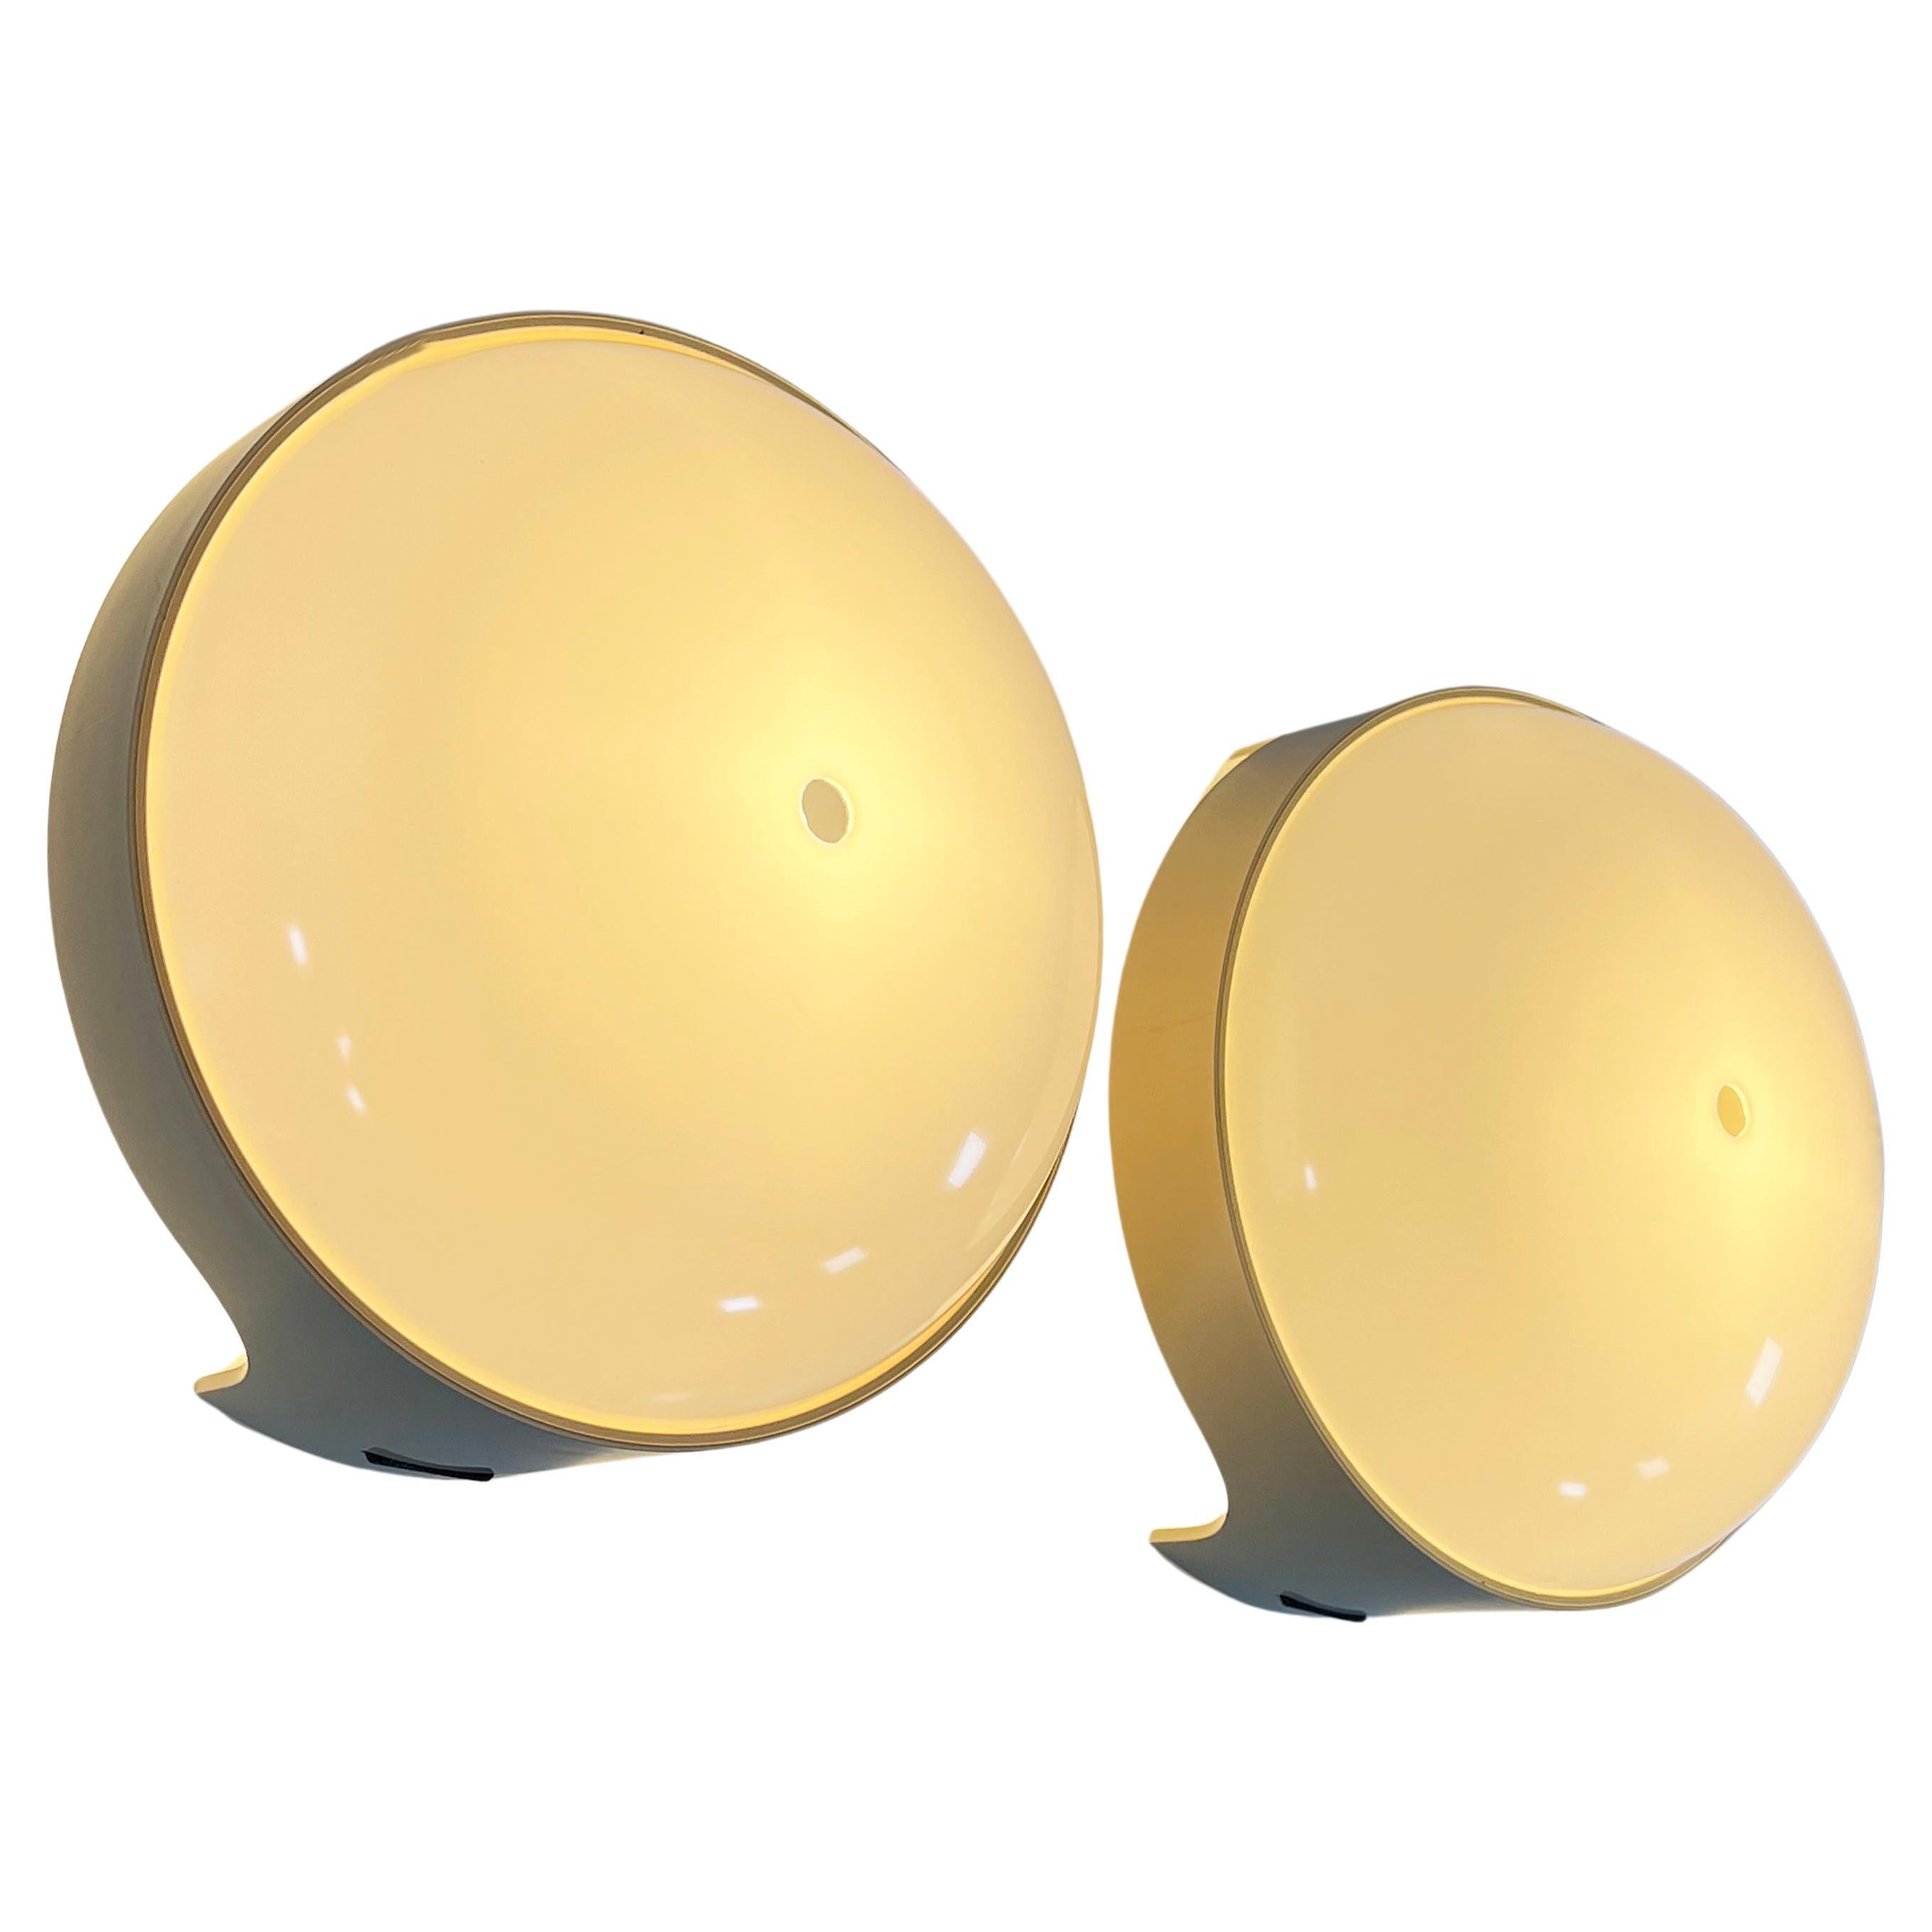 Pair of Quattro KD 4335 Wall Lamps by Joe Colombo for Kartell, 1960 For Sale